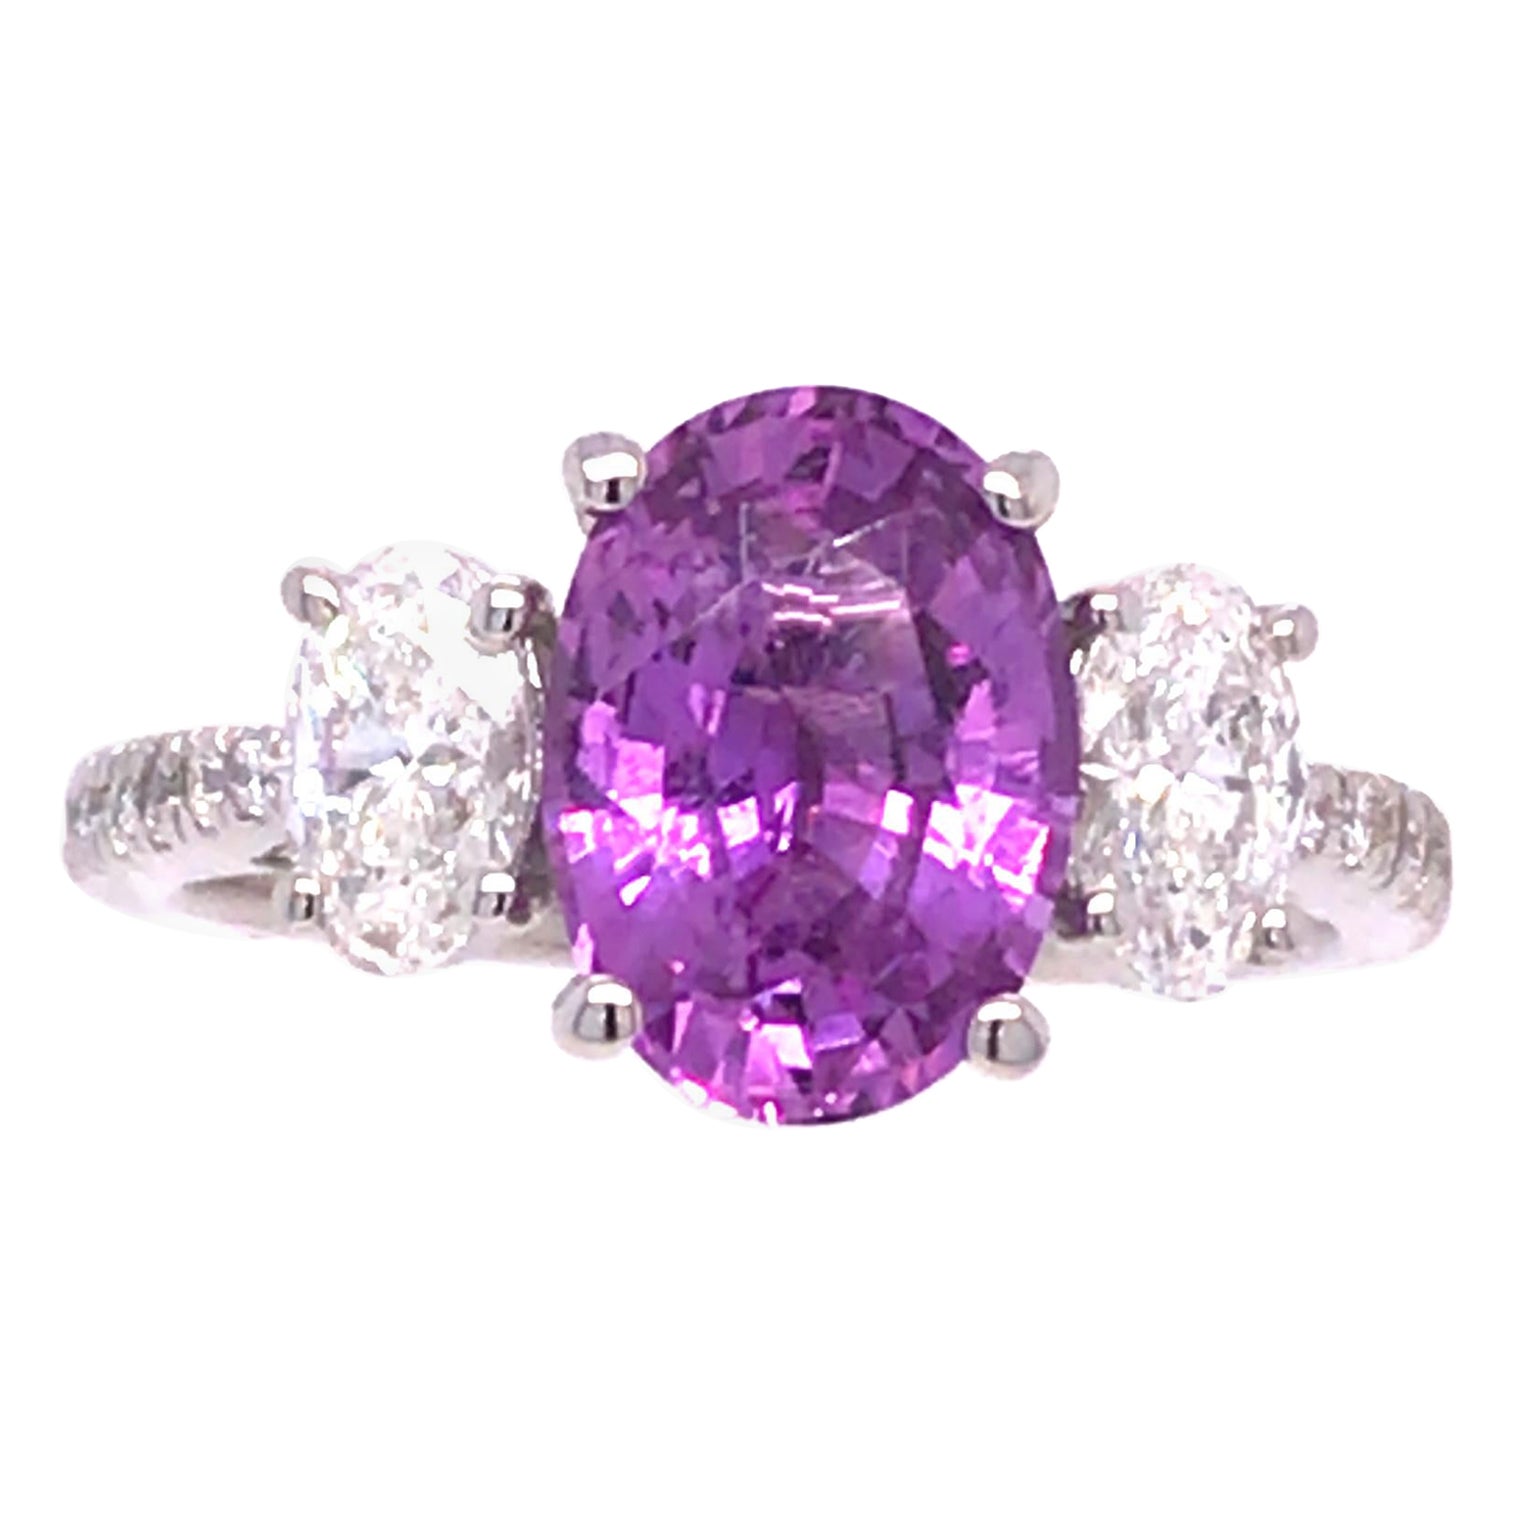 2.53 Carat Oval Cut Pink Rose Sapphire and Diamond Ring in 18k White Gold For Sale